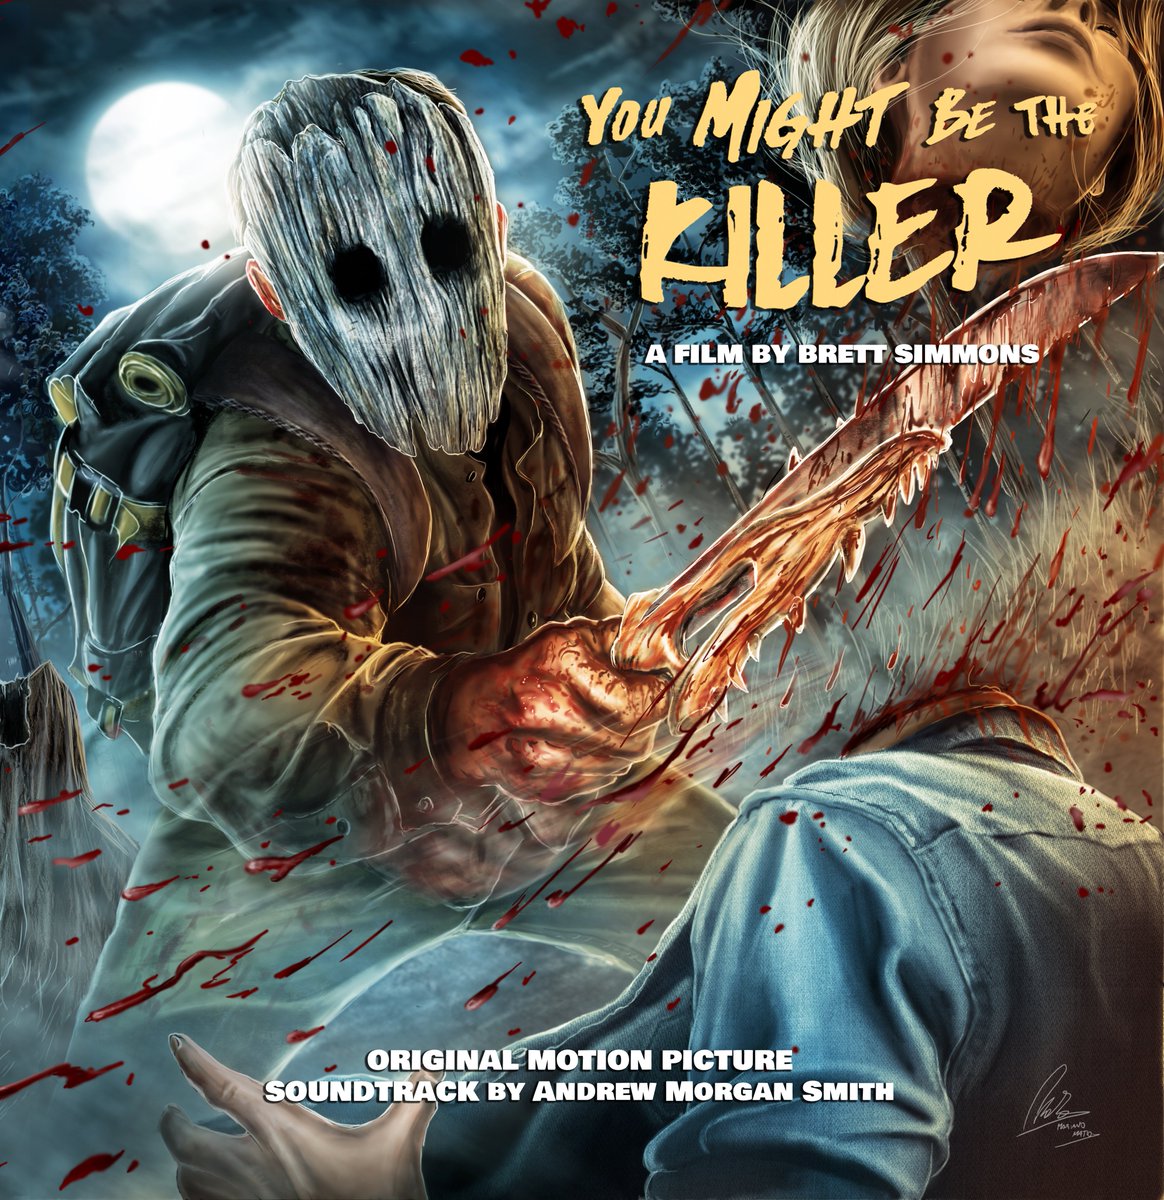 Cover for the LP soundtrack now on pre order by @TreasFilmsUK #vinylrecords #soundtrack #horror #artwork